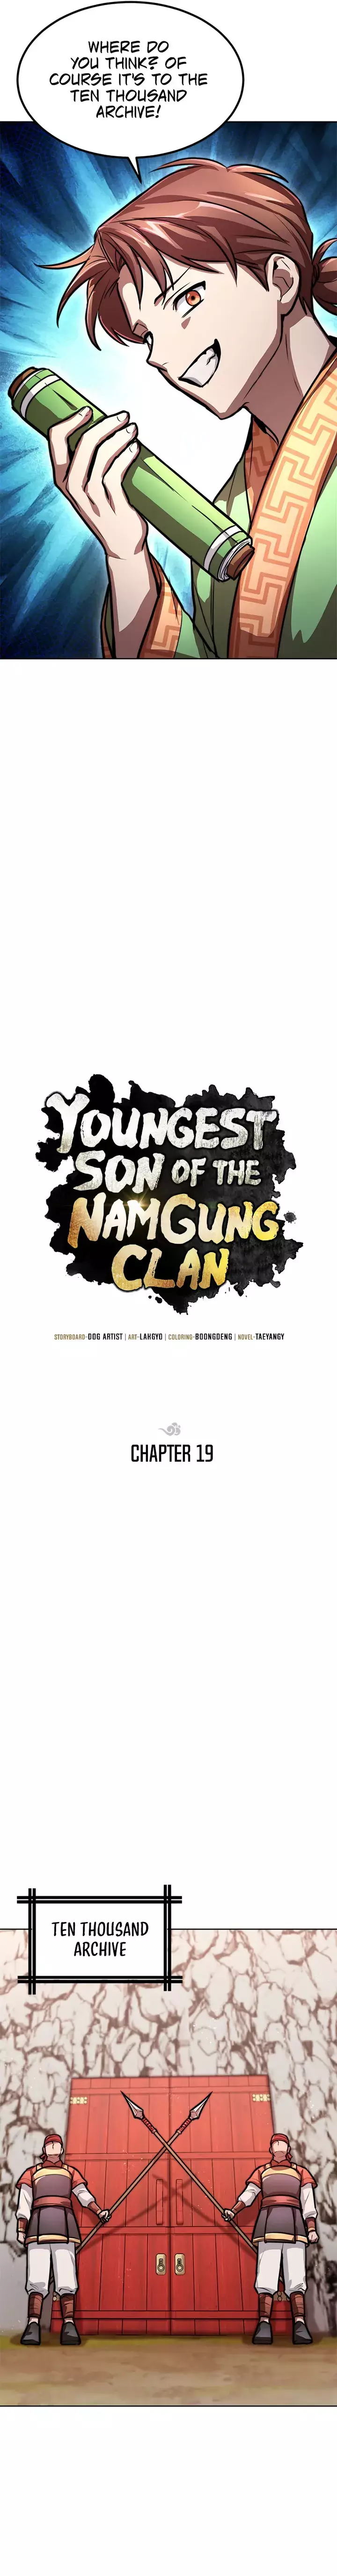 Youngest Son Of The Namgung Clan - 19 page 7-9441b727